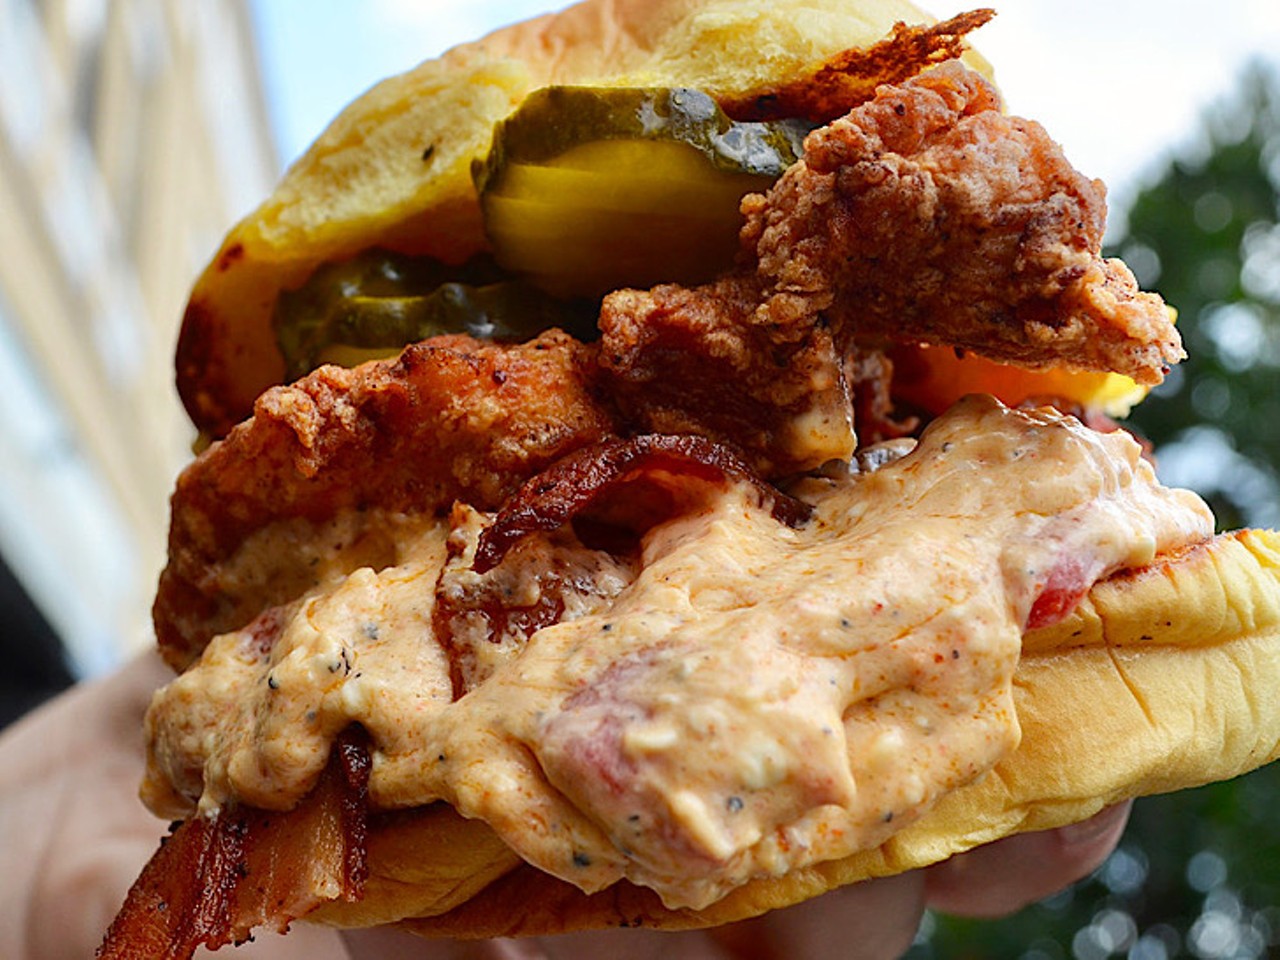 Flock and Stock
615 Channelside Dr, Tampa, FL
The &#147;Dixie Chick&#148; has maple bacon and pimento cheese, topped on their &#147;favorite bun.&#148; The sandwich also has the standard butter pickles, and the chicken is described as &#147;buttermilk chicken.&#148; 
Photo via Flock and Stock/flockandstock.com